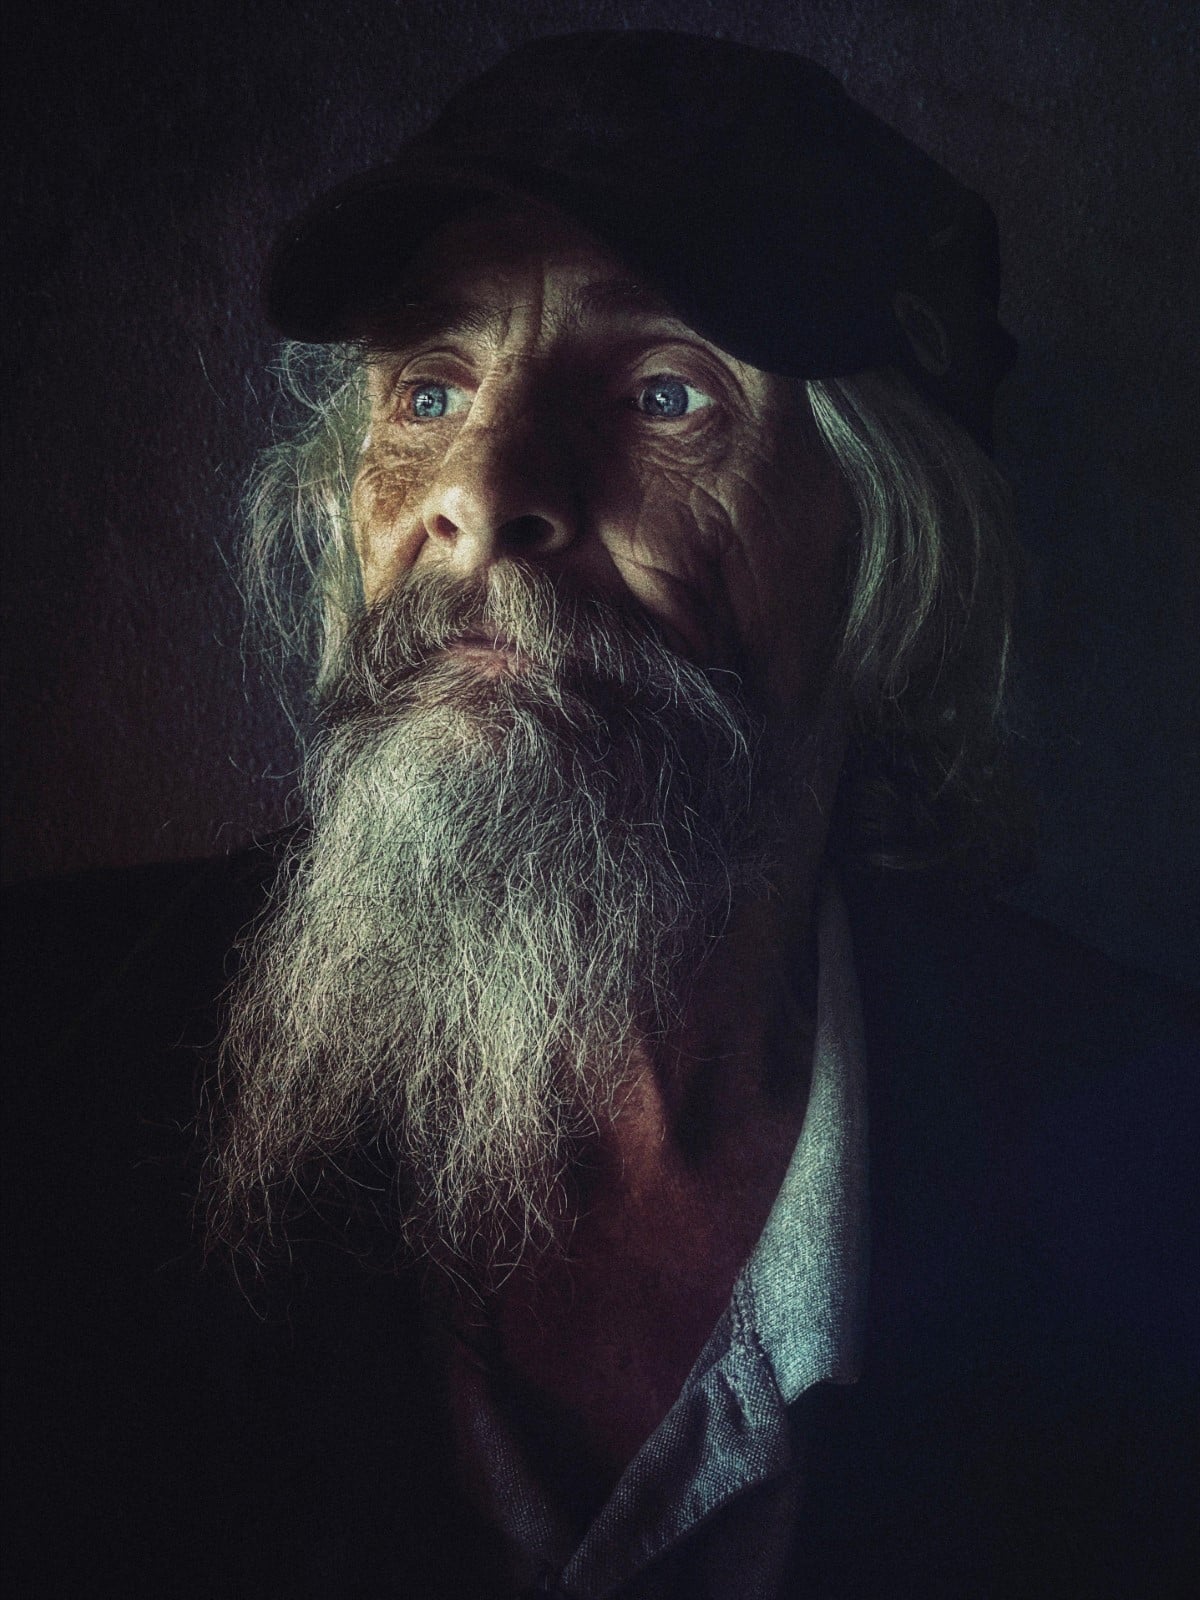 Mobile Portrait of an Older Man with a Beard